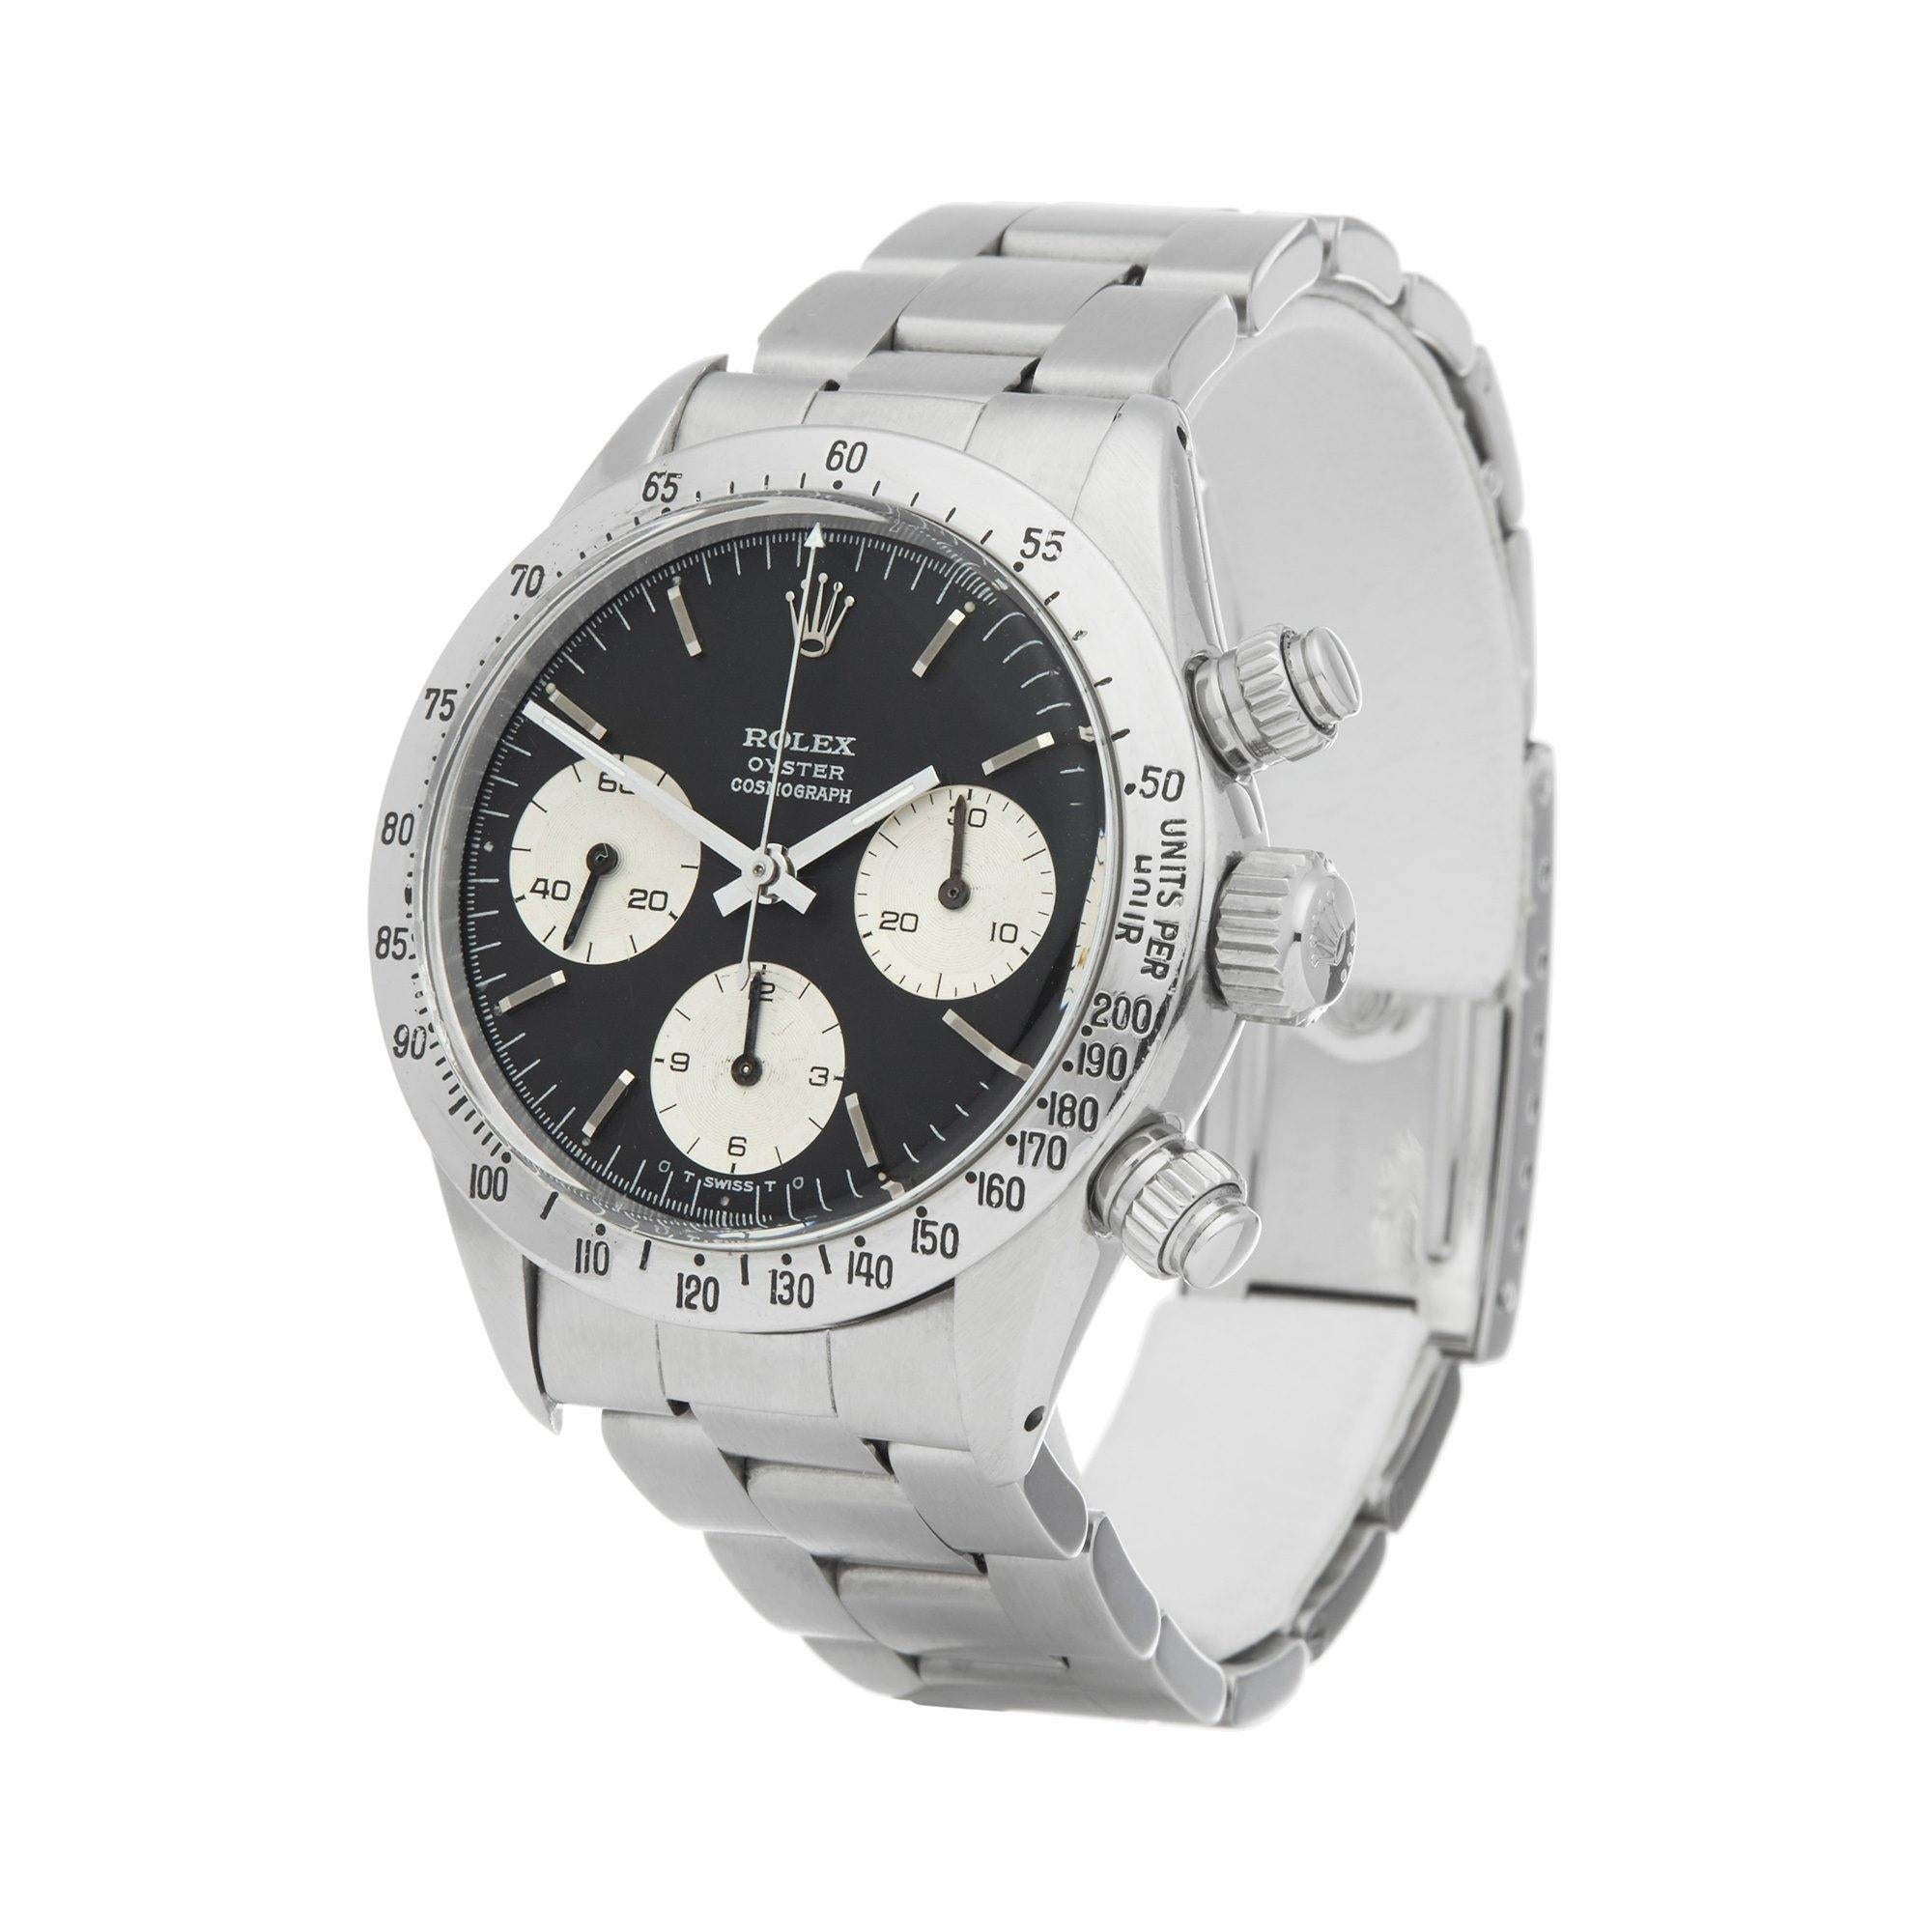 Xupes Reference: W007204
Manufacturer: Rolex
Model: Daytona
Model Variant: 
Model Number: 6265
Age: 1973
Gender: Men
Complete With: Rolex Box 
Dial: Black Baton
Glass: Plexiglass
Case Size: 37mm
Case Material: Stainless Steel
Strap Material: